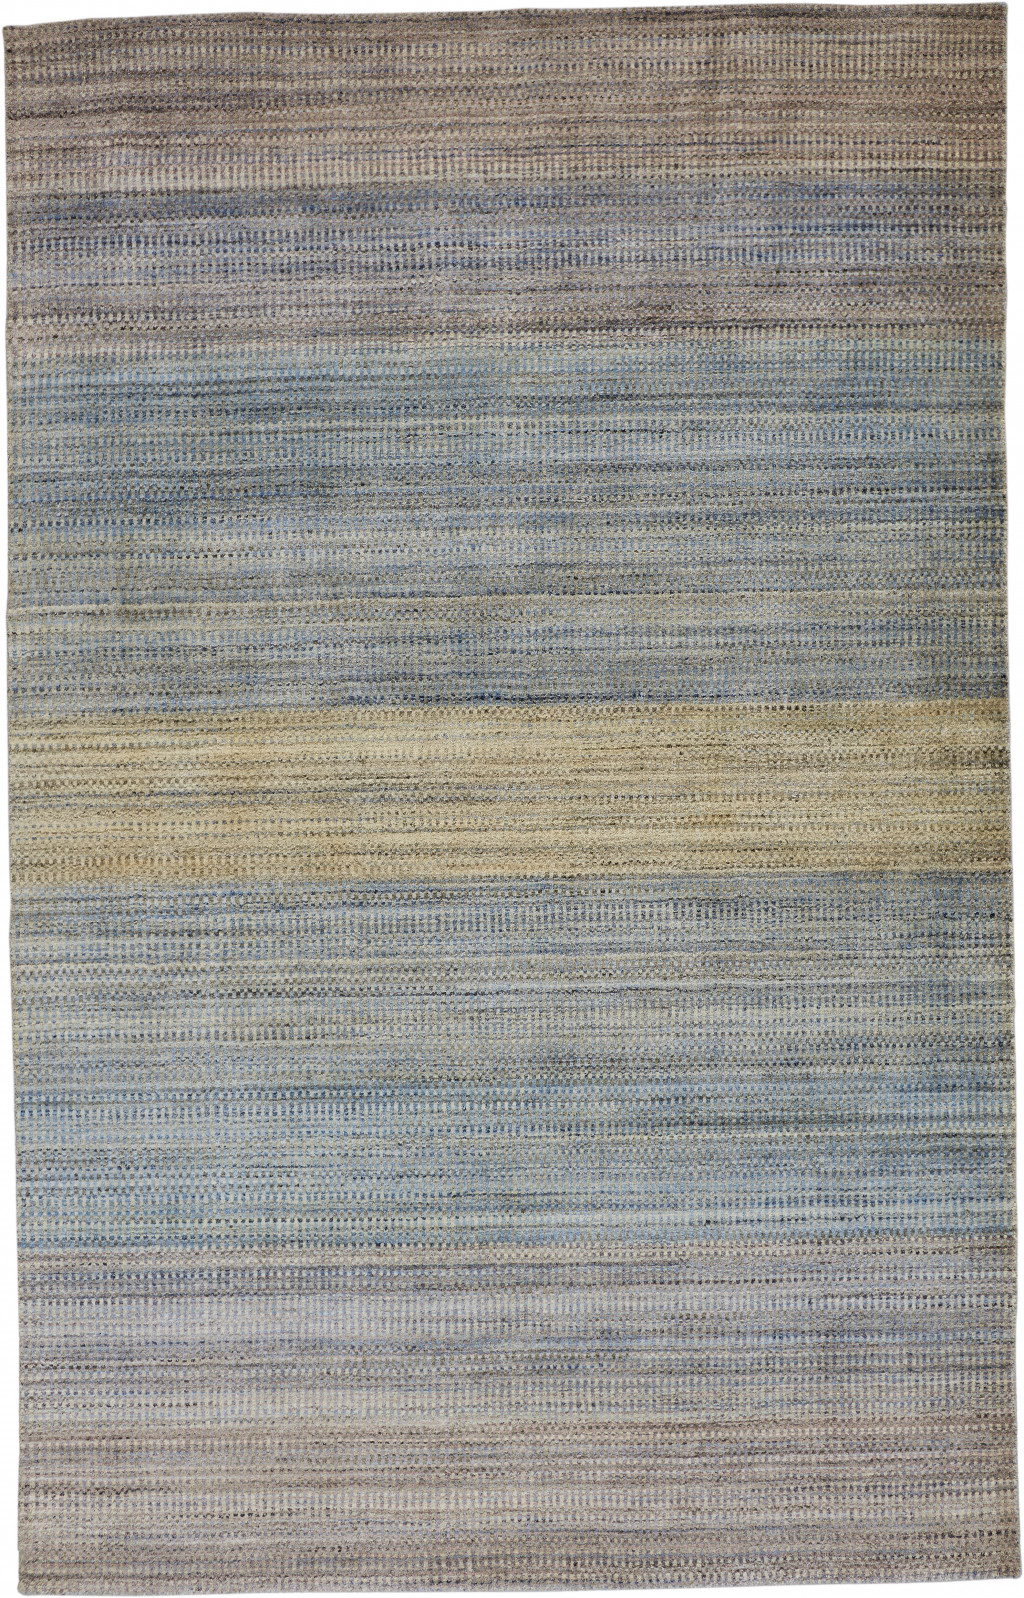 10' X 13' Blue Purple And Tan Ombre Hand Woven Area Rug-511746-1